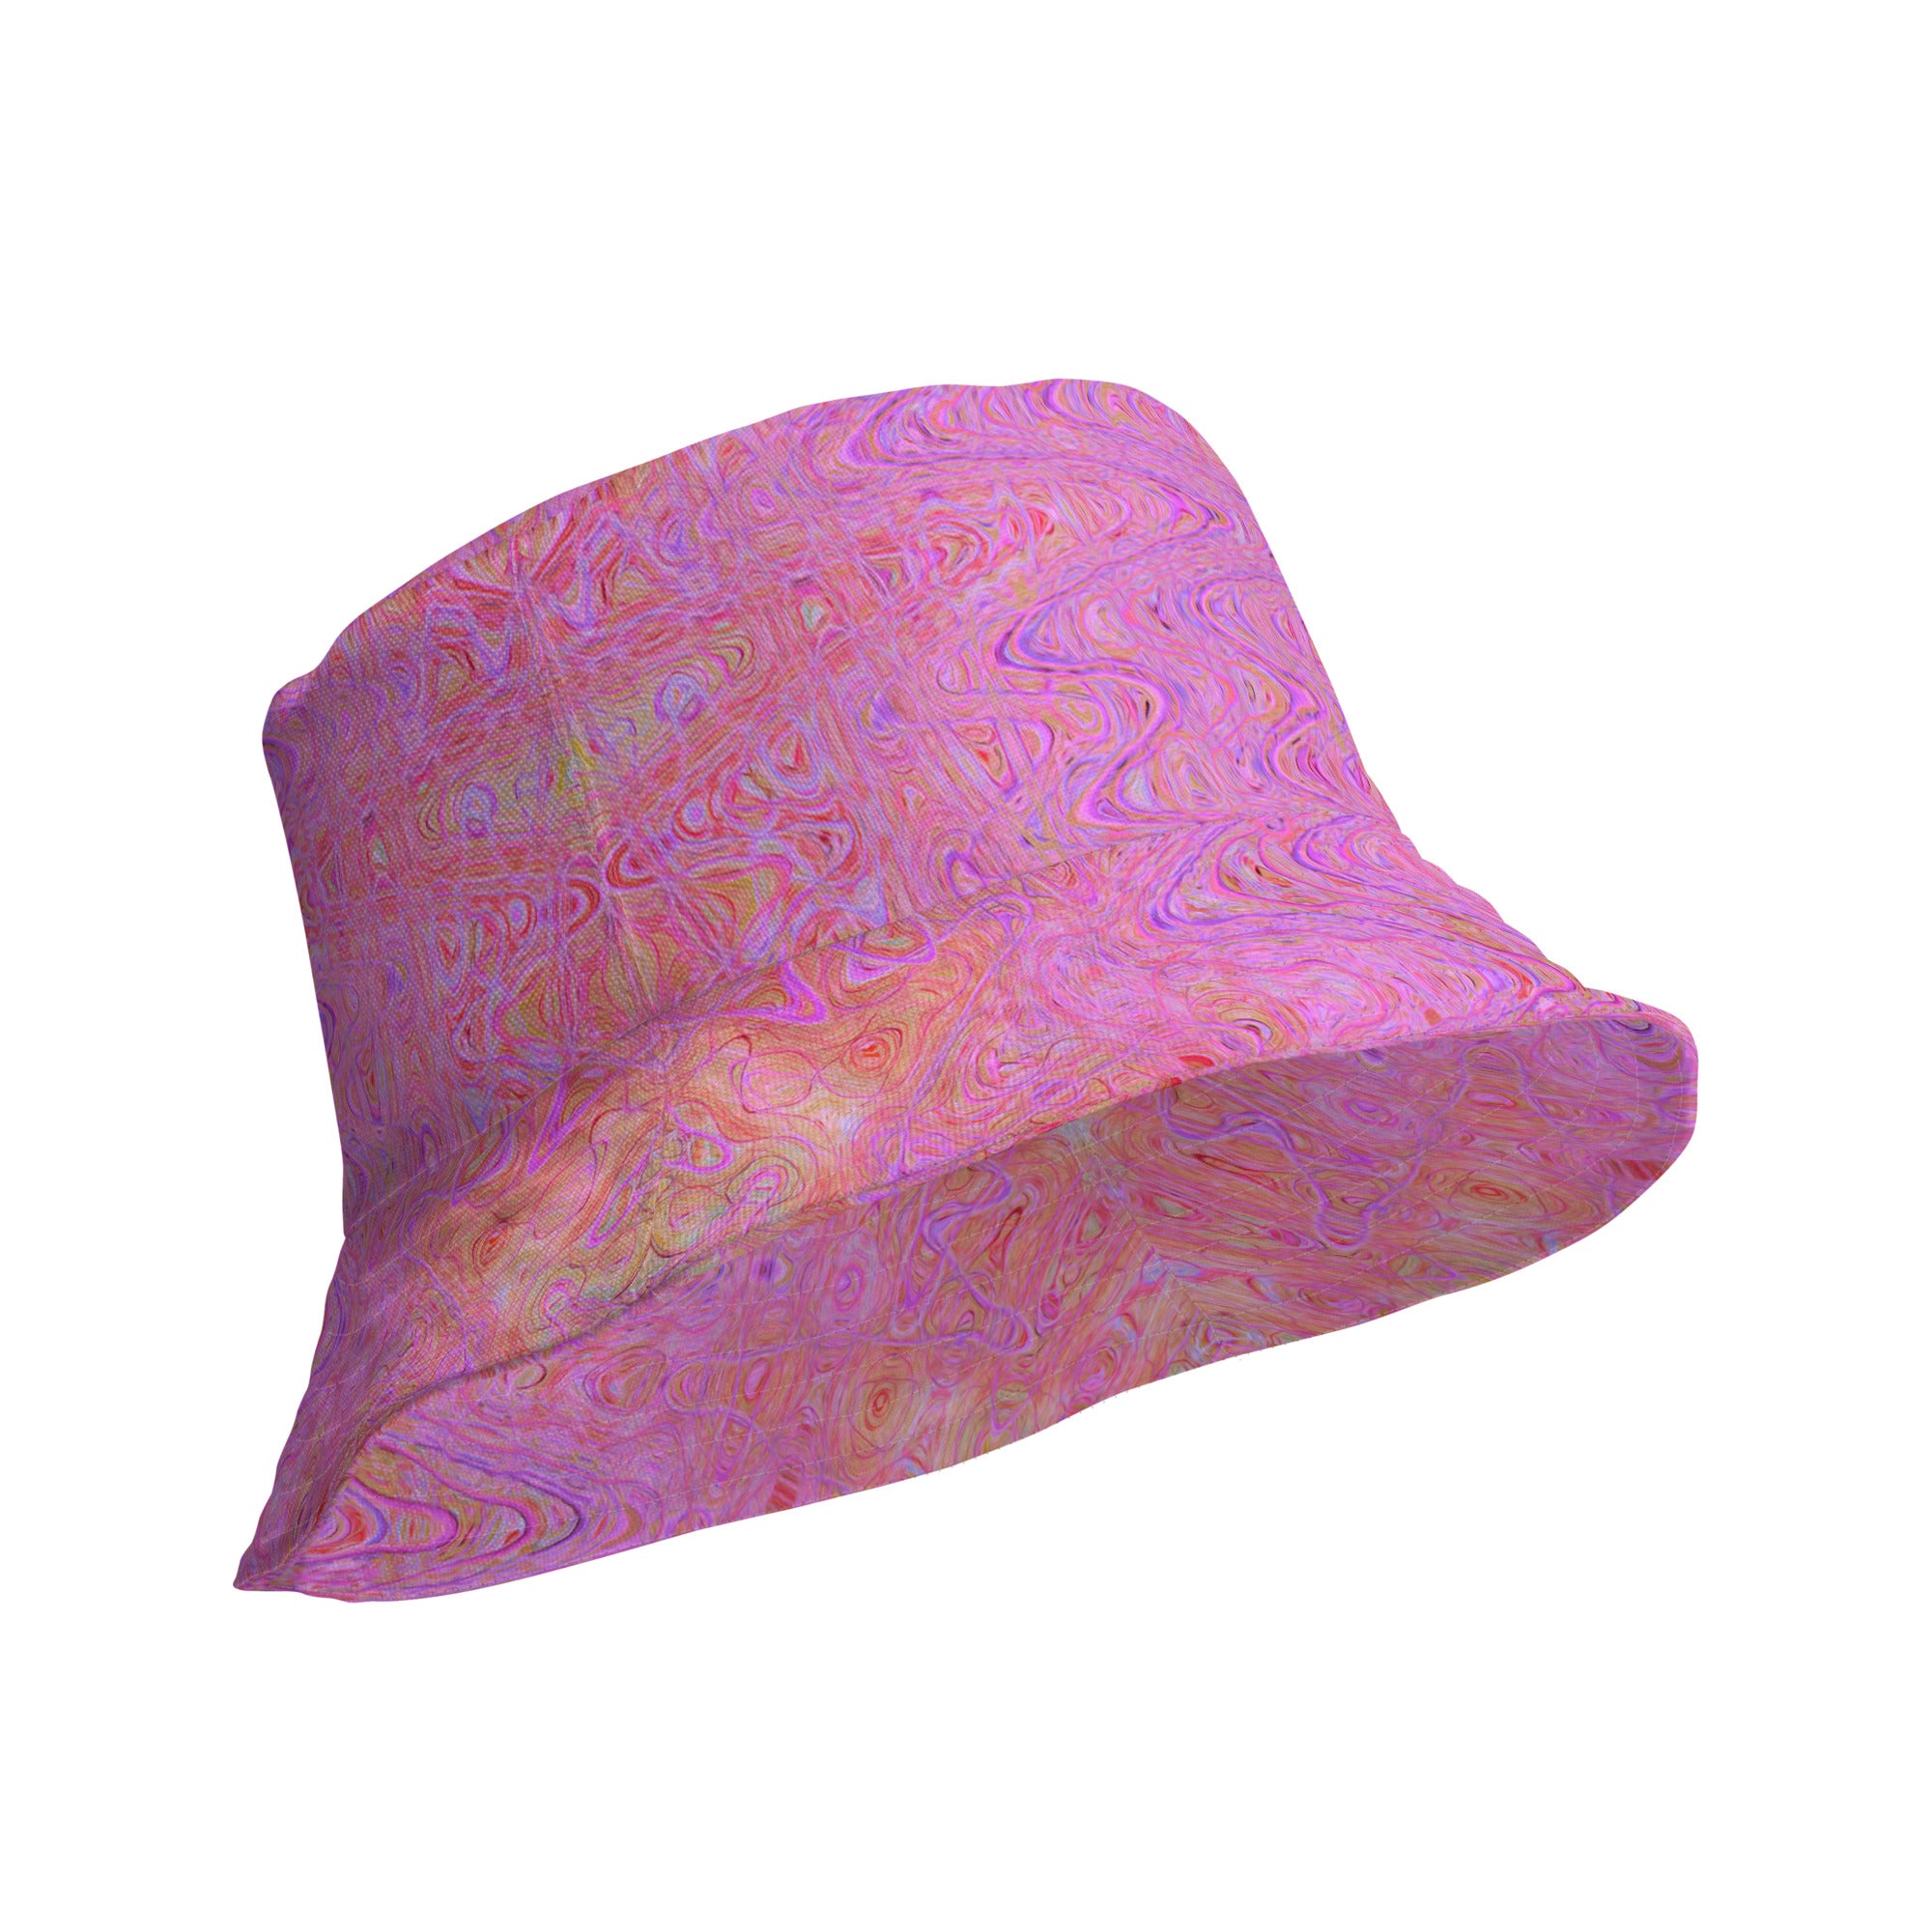 Reversible Bucket Hat | Retro Abstract Pink and Orange Squiggly Lines